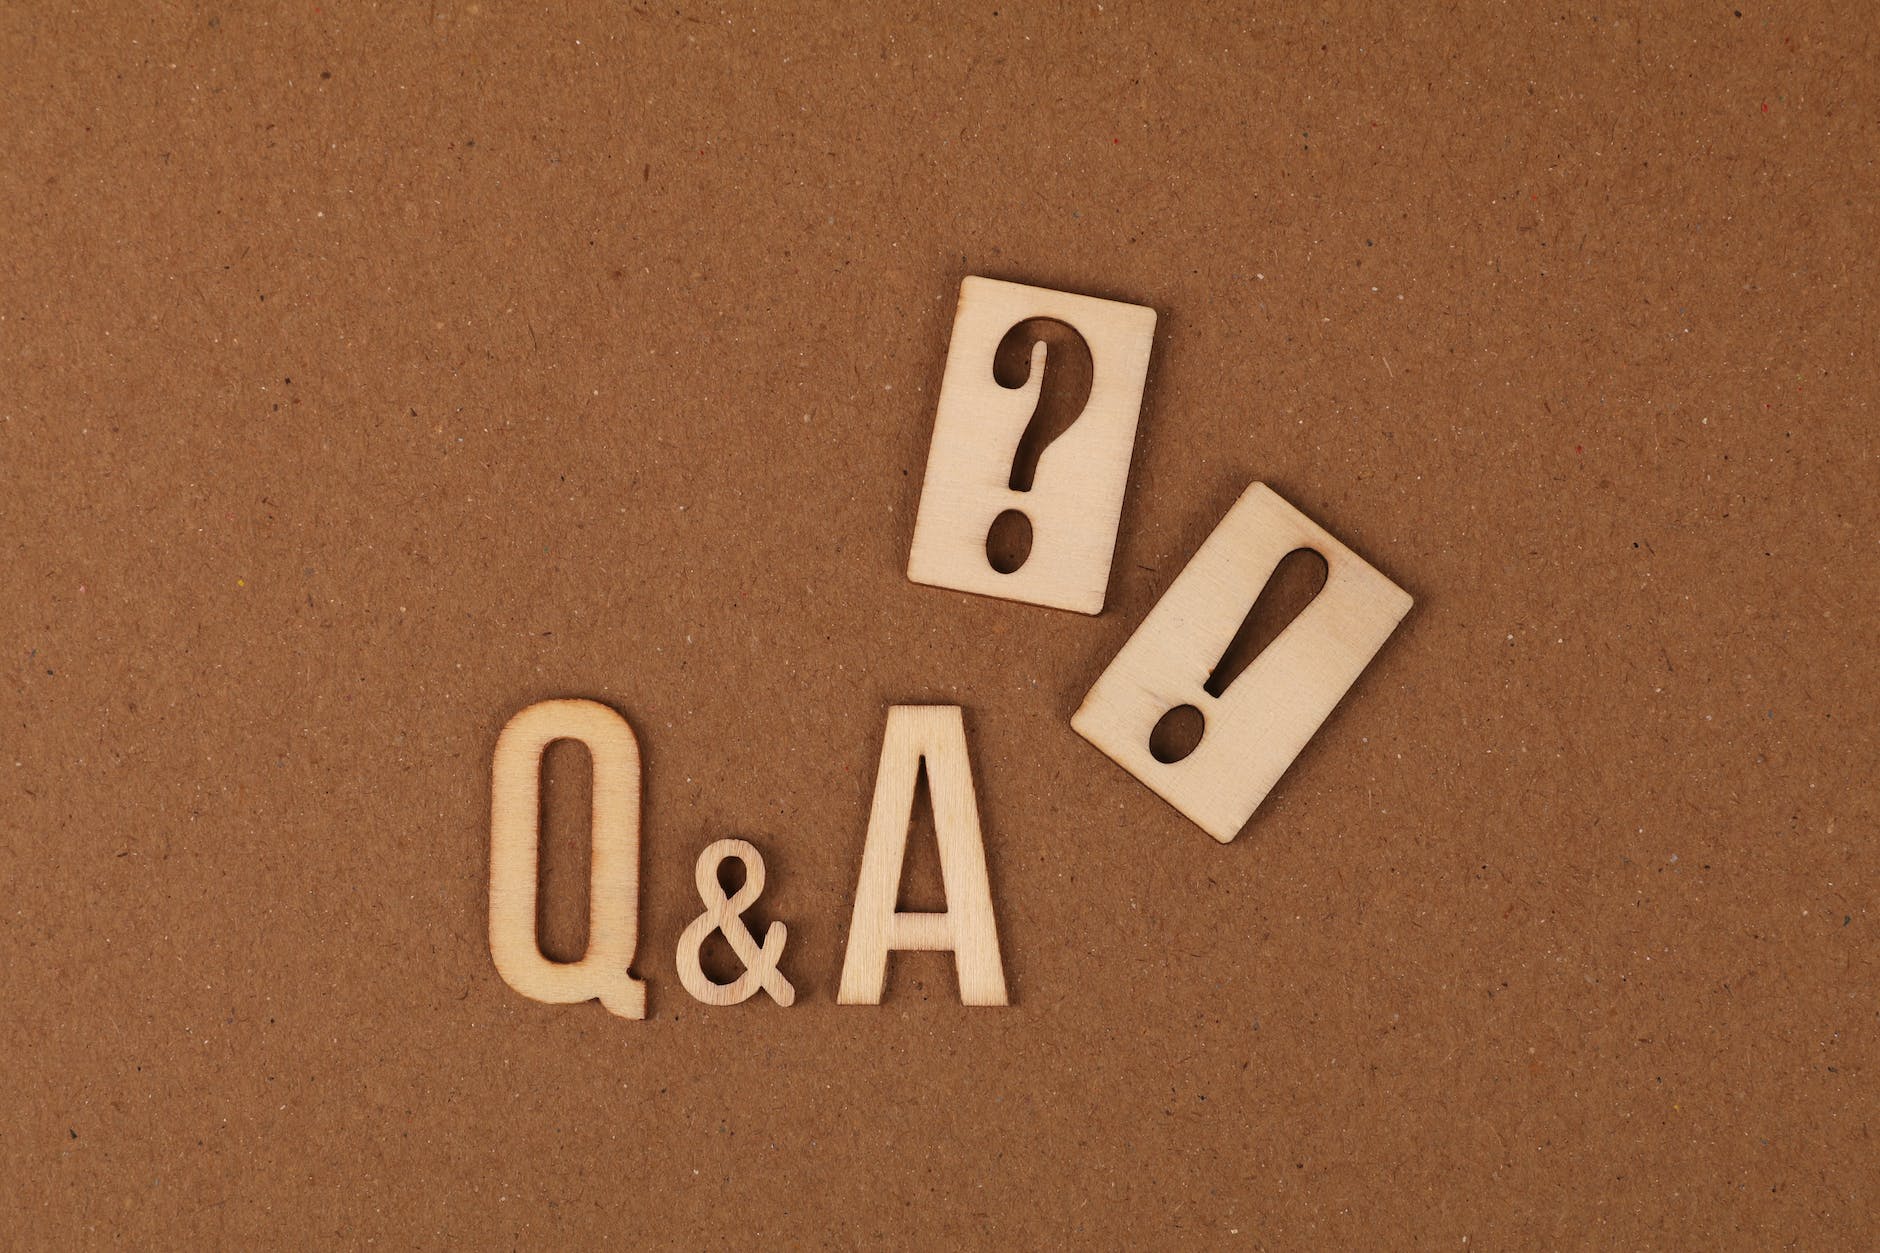 question and answer letters and an exclamation and question marks